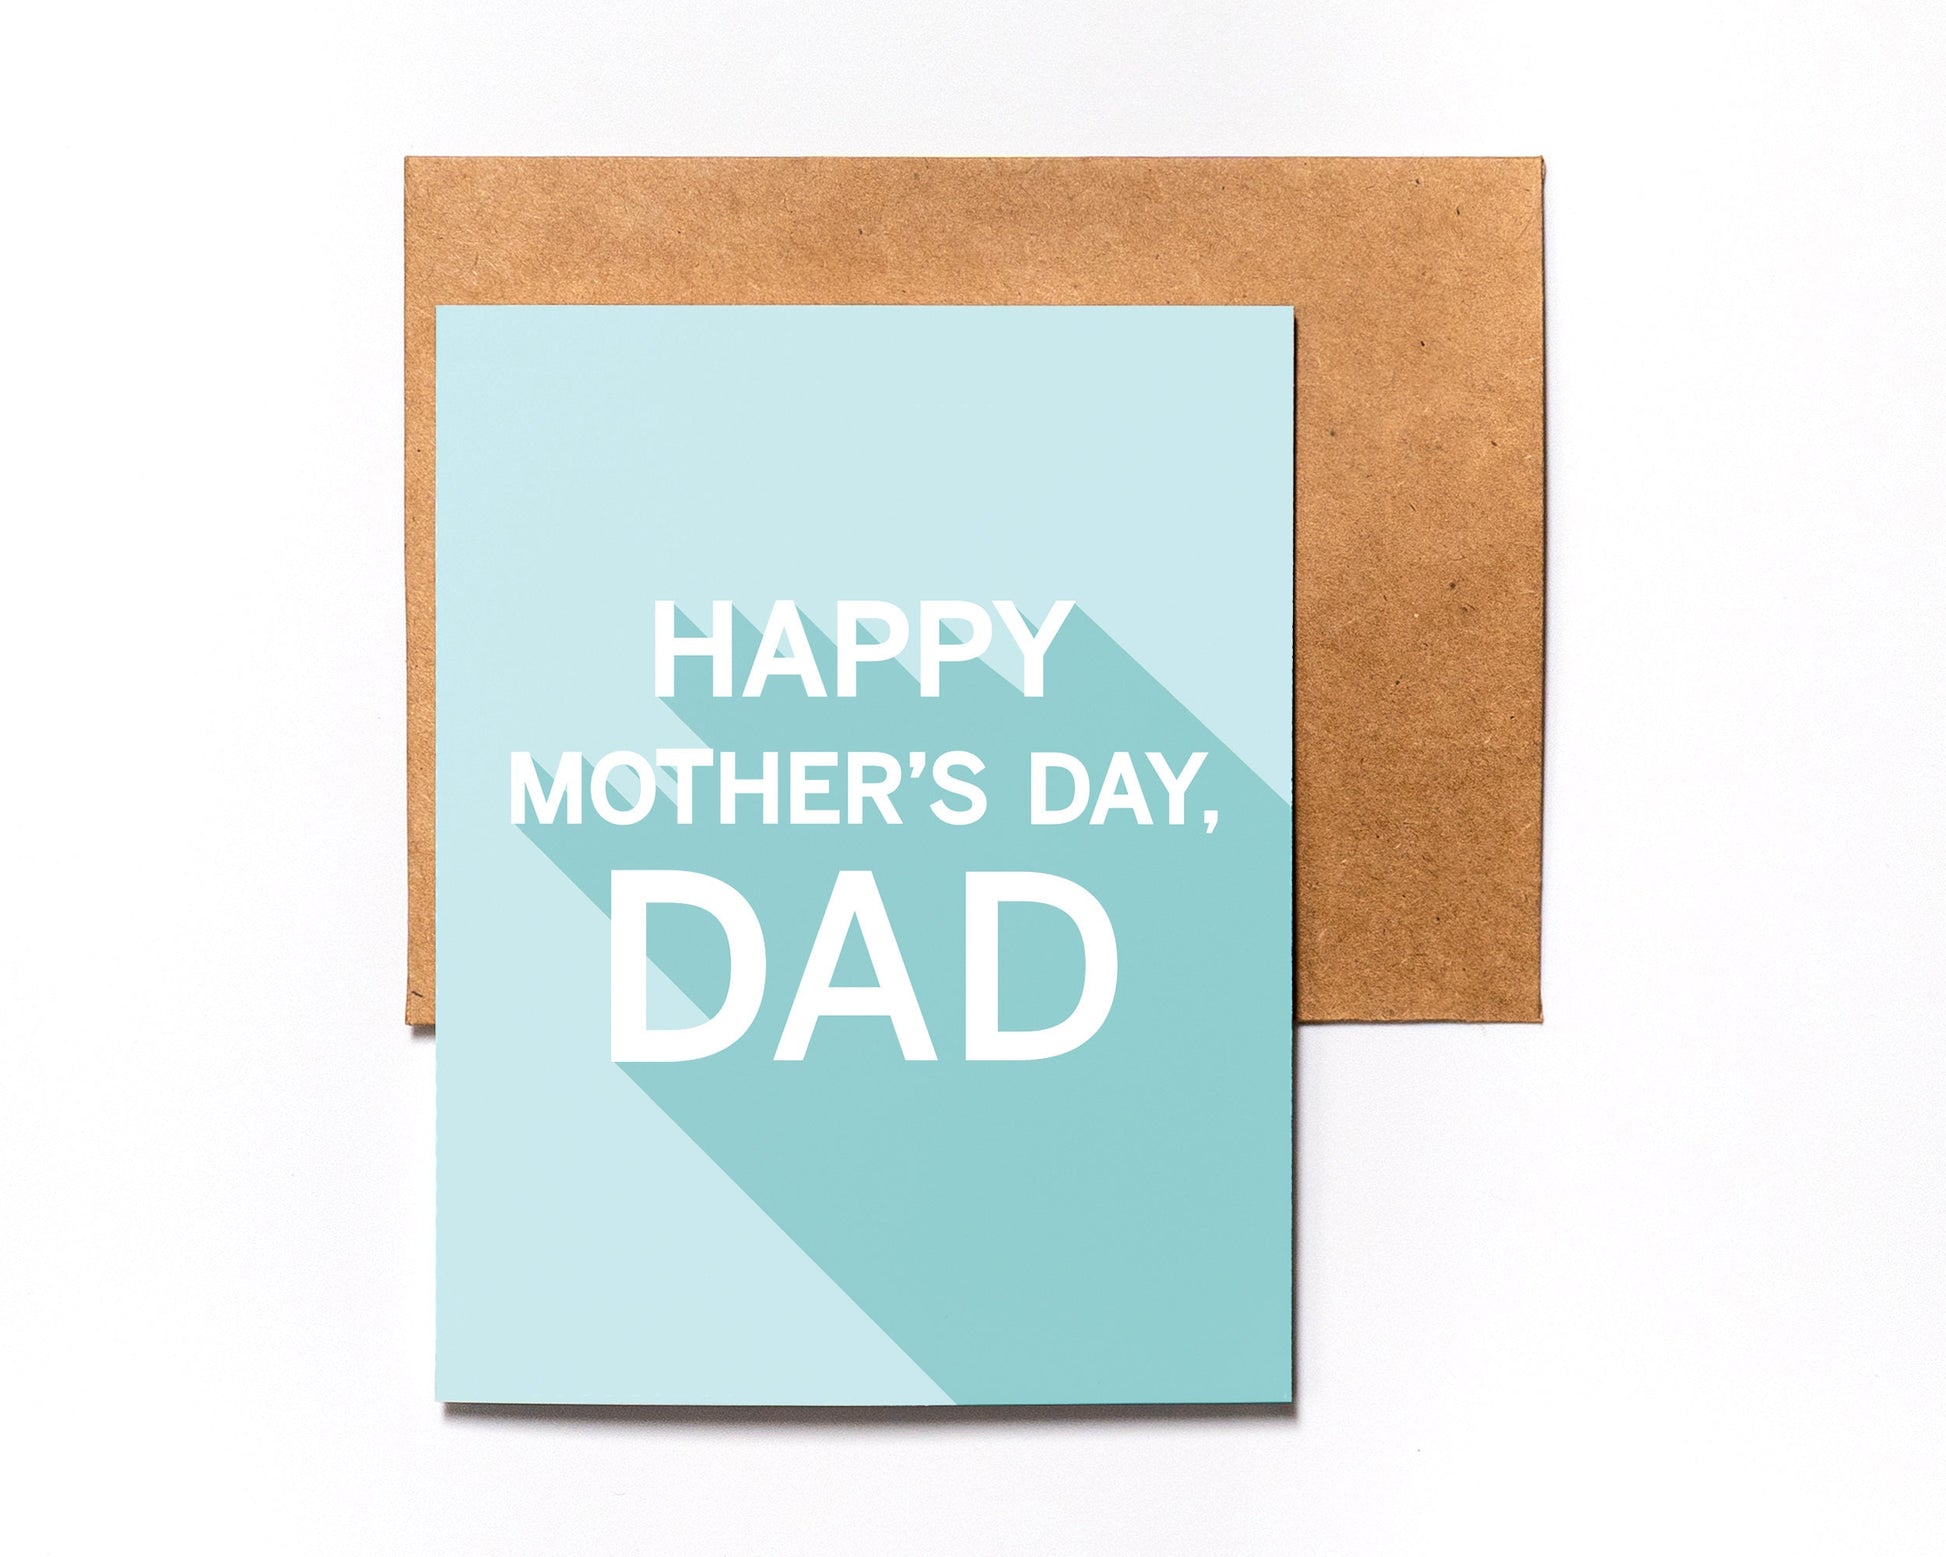 Mother's Day Card | For Dad - Like A Mom - For Non-Biological Parent - For Friend - Wishing You a Happy Mother's Day - Funny - Gift Ideas